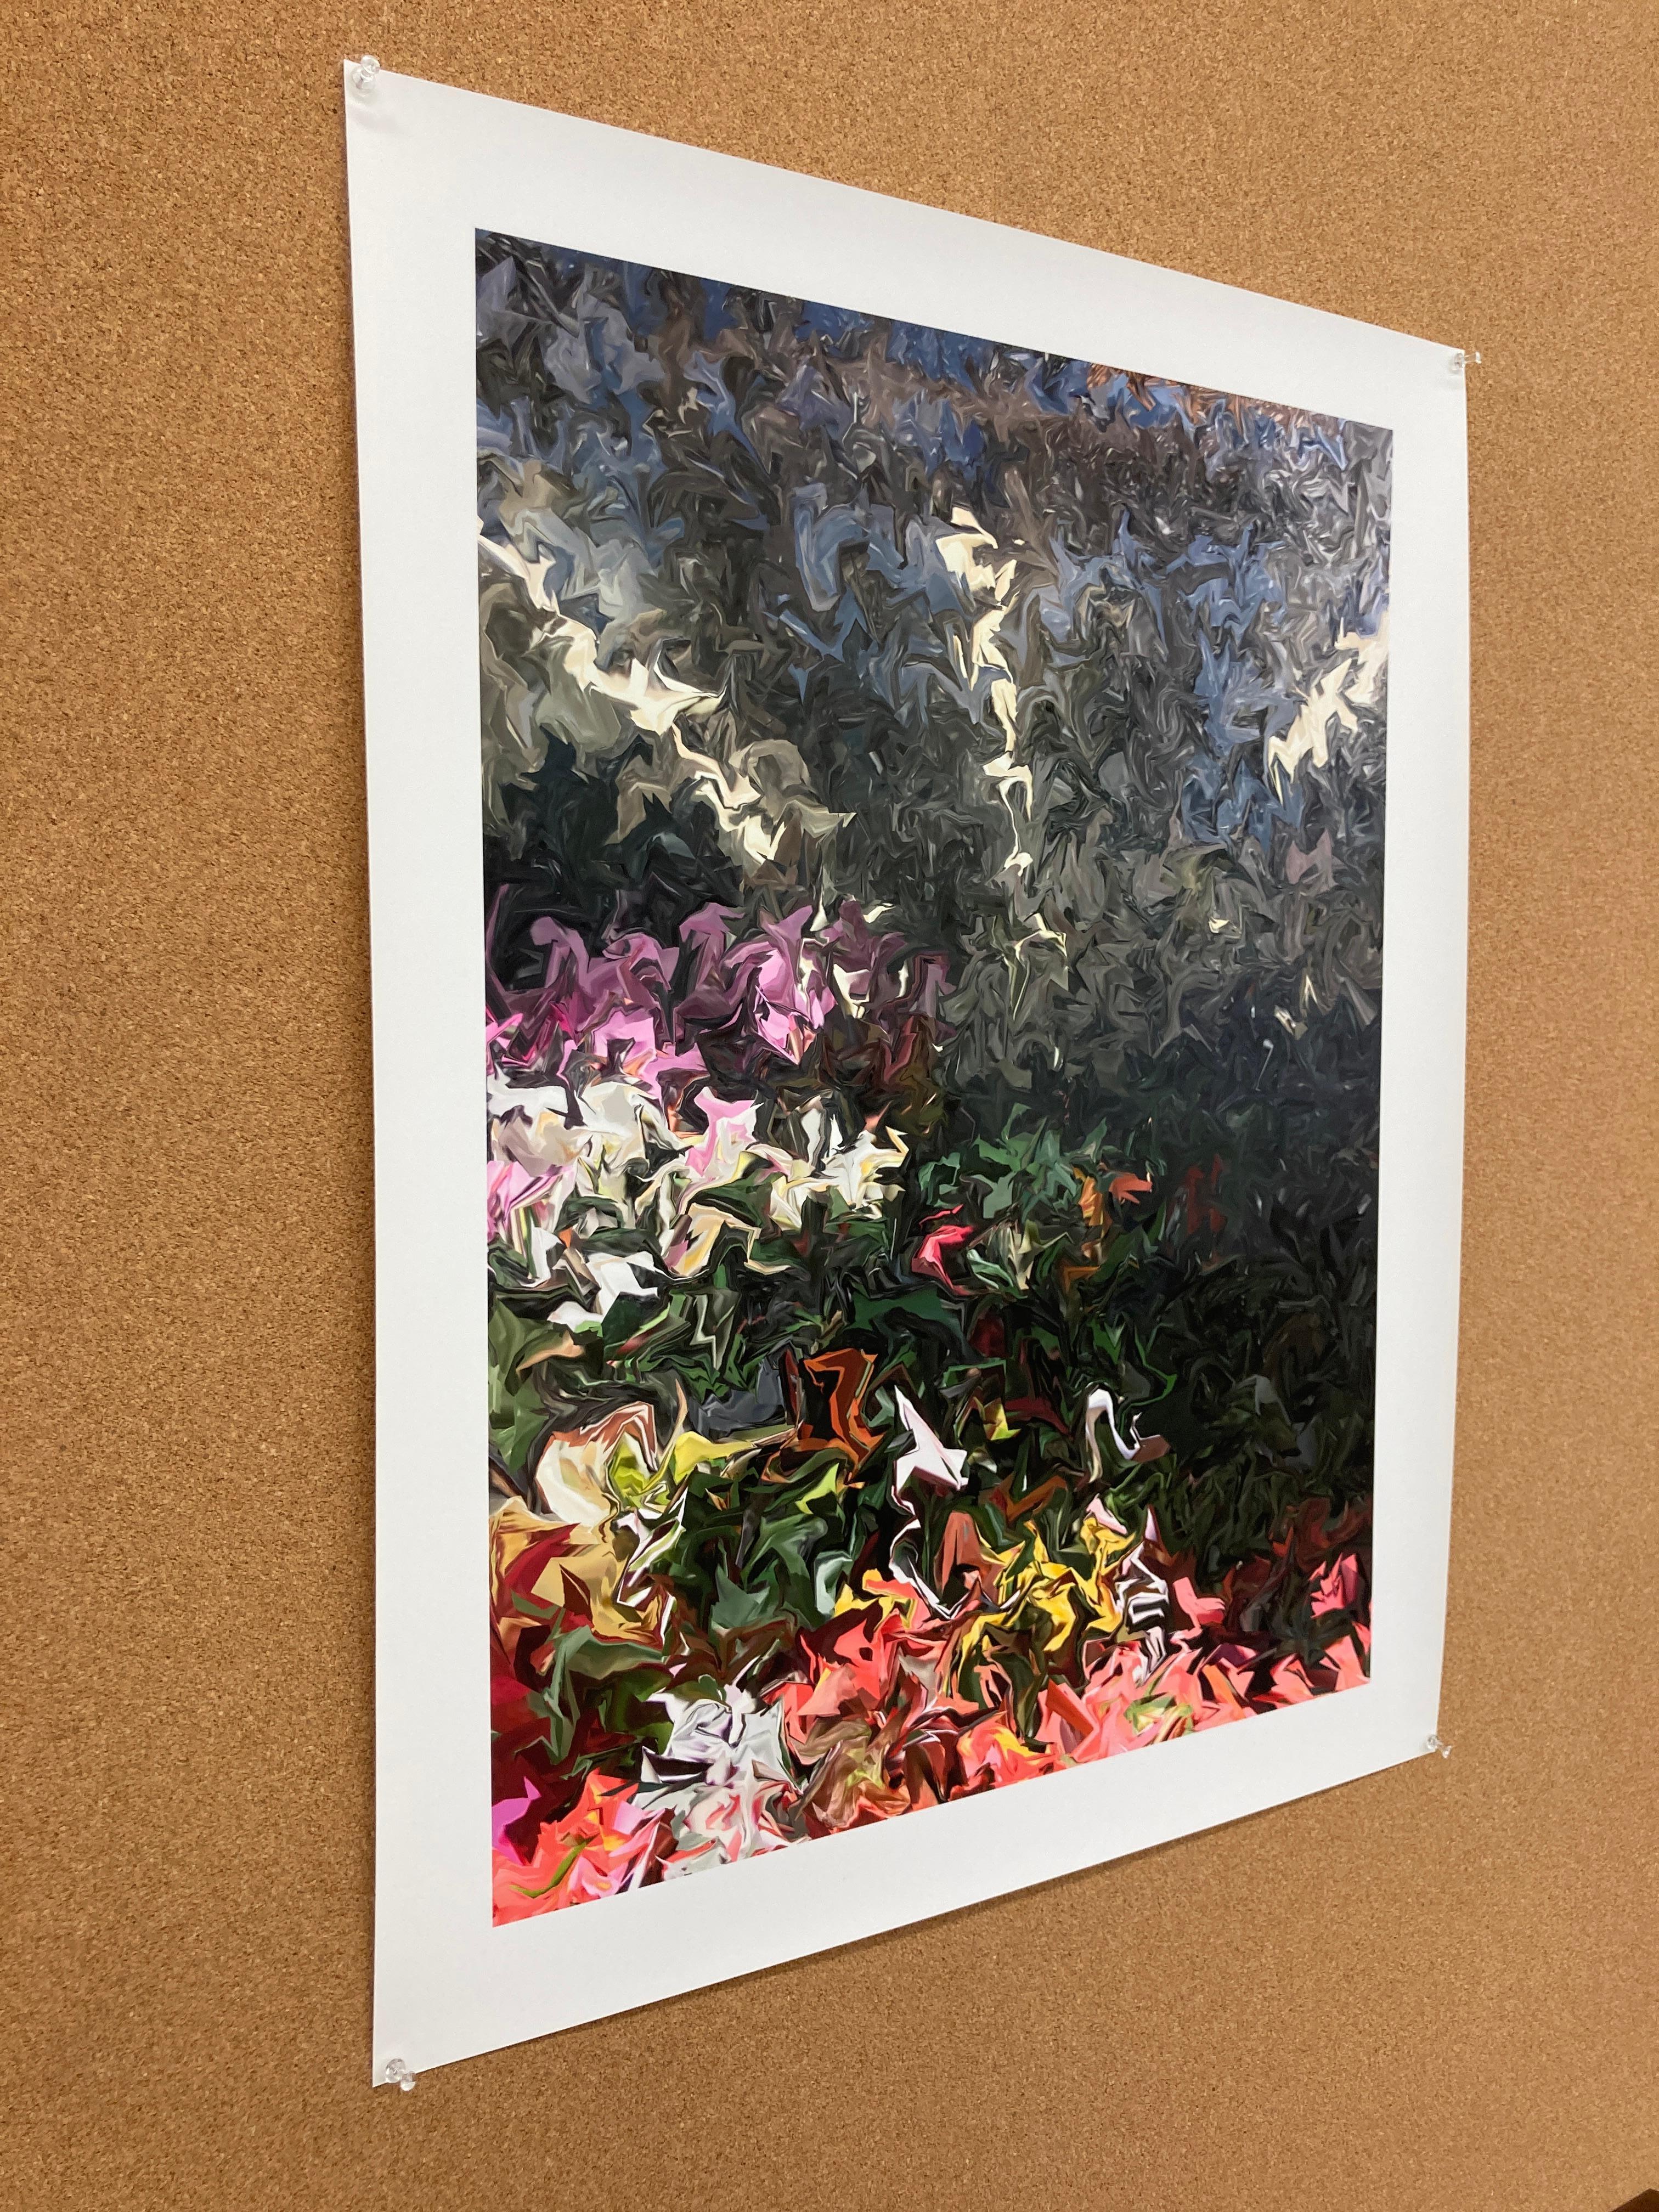 Begonias and Orchids, 2018 is part of the artist's 